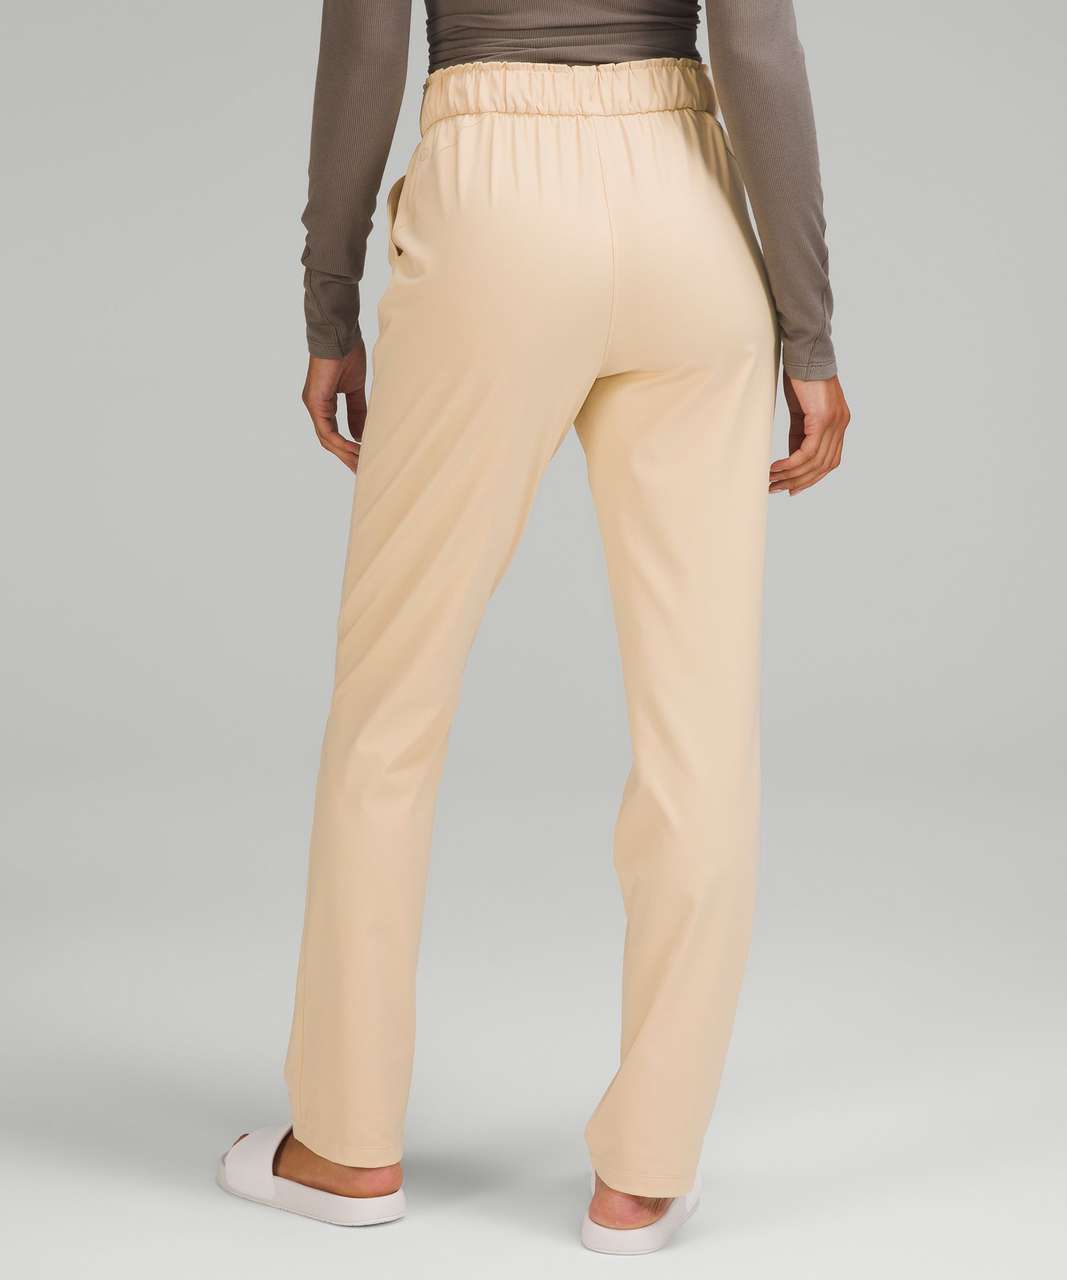 Lululemon Stretch High-Rise Pant - Prosecco